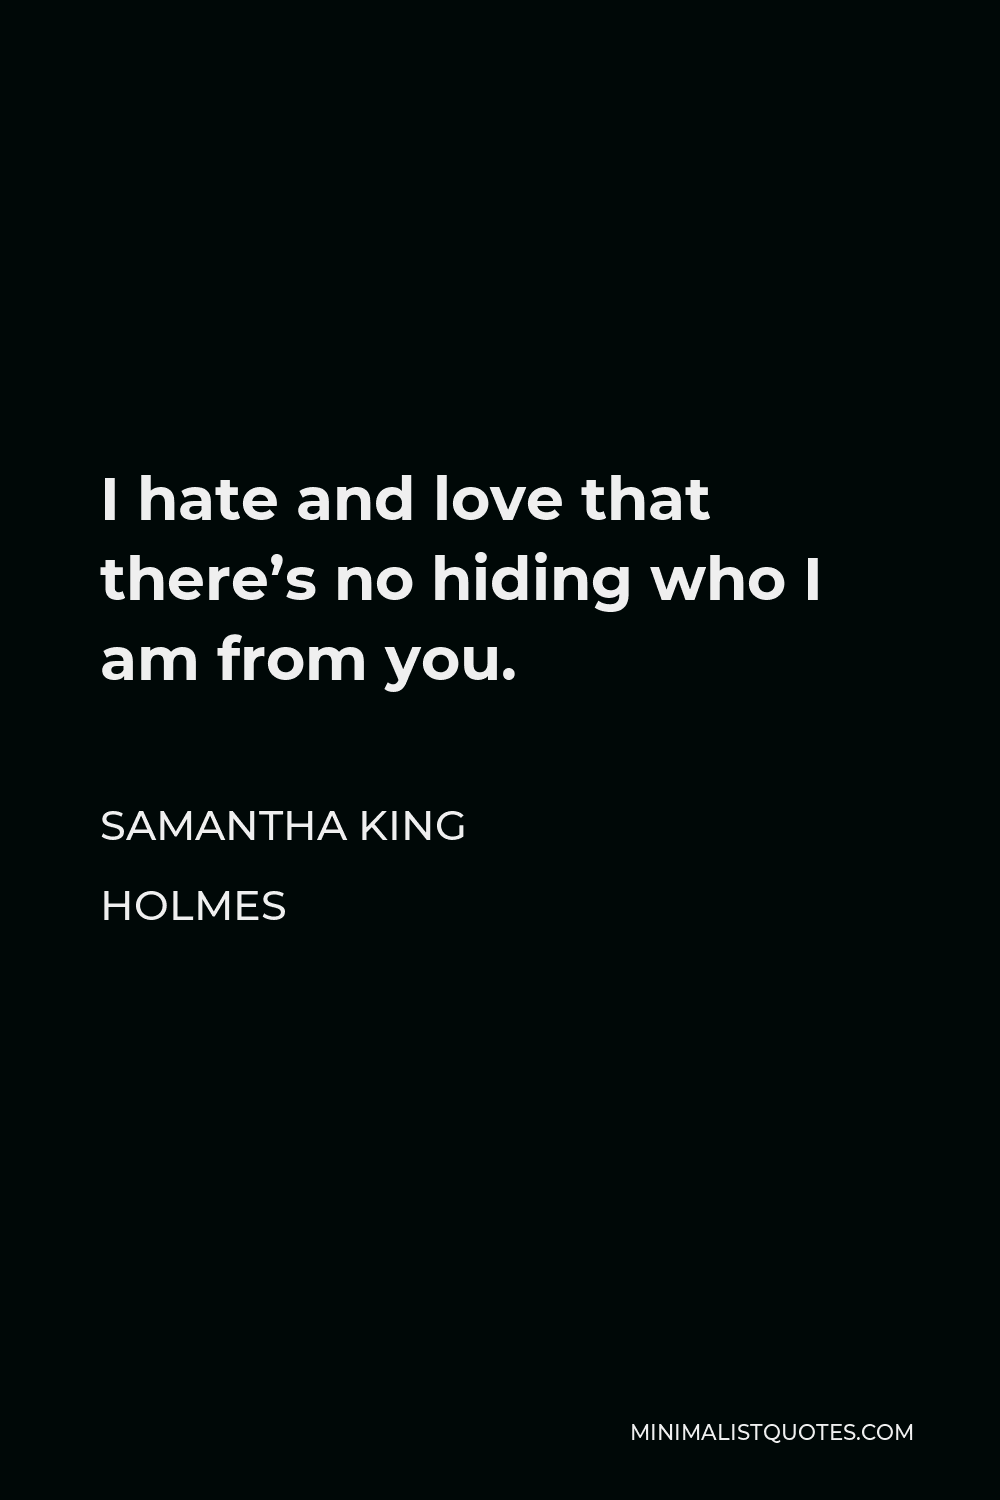 Samantha King Holmes Quote - I hate and love that there’s no hiding who I am from you.